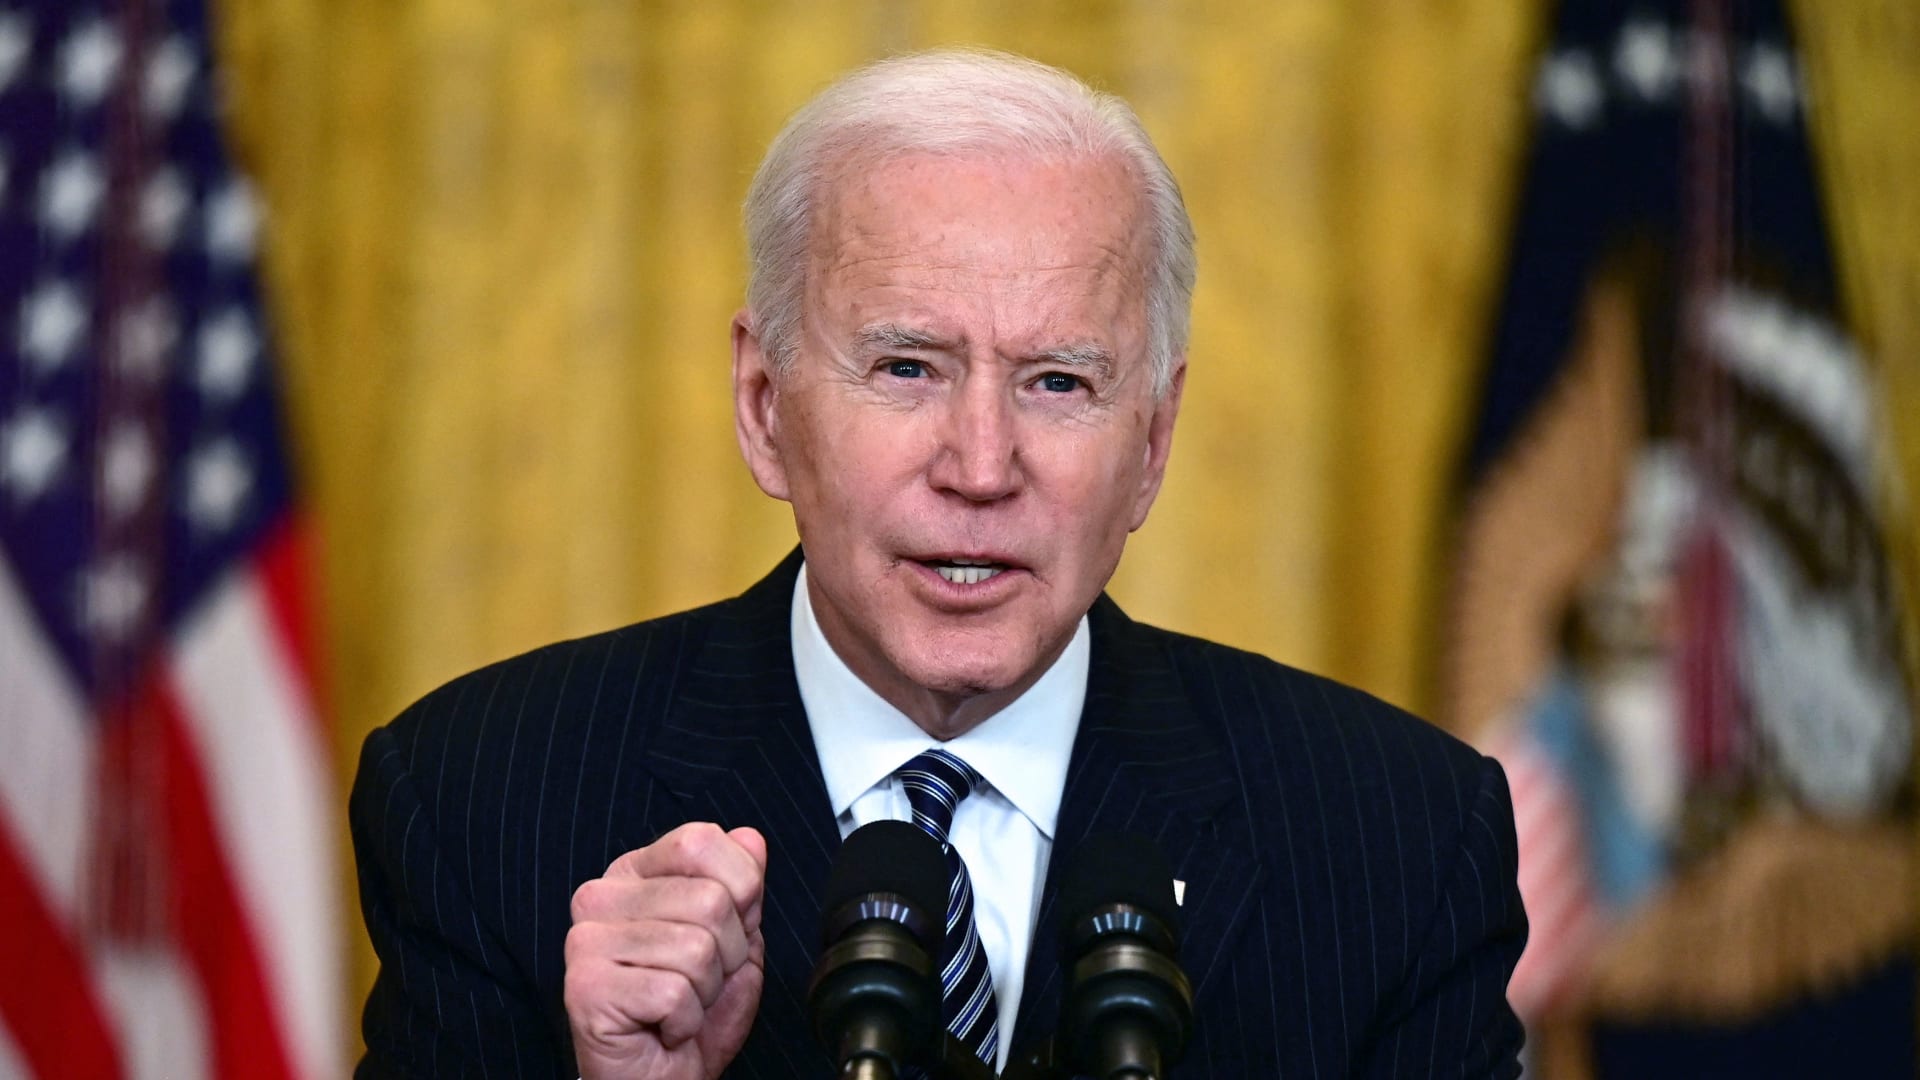 Biden administration to open emergency shelters amid border surge